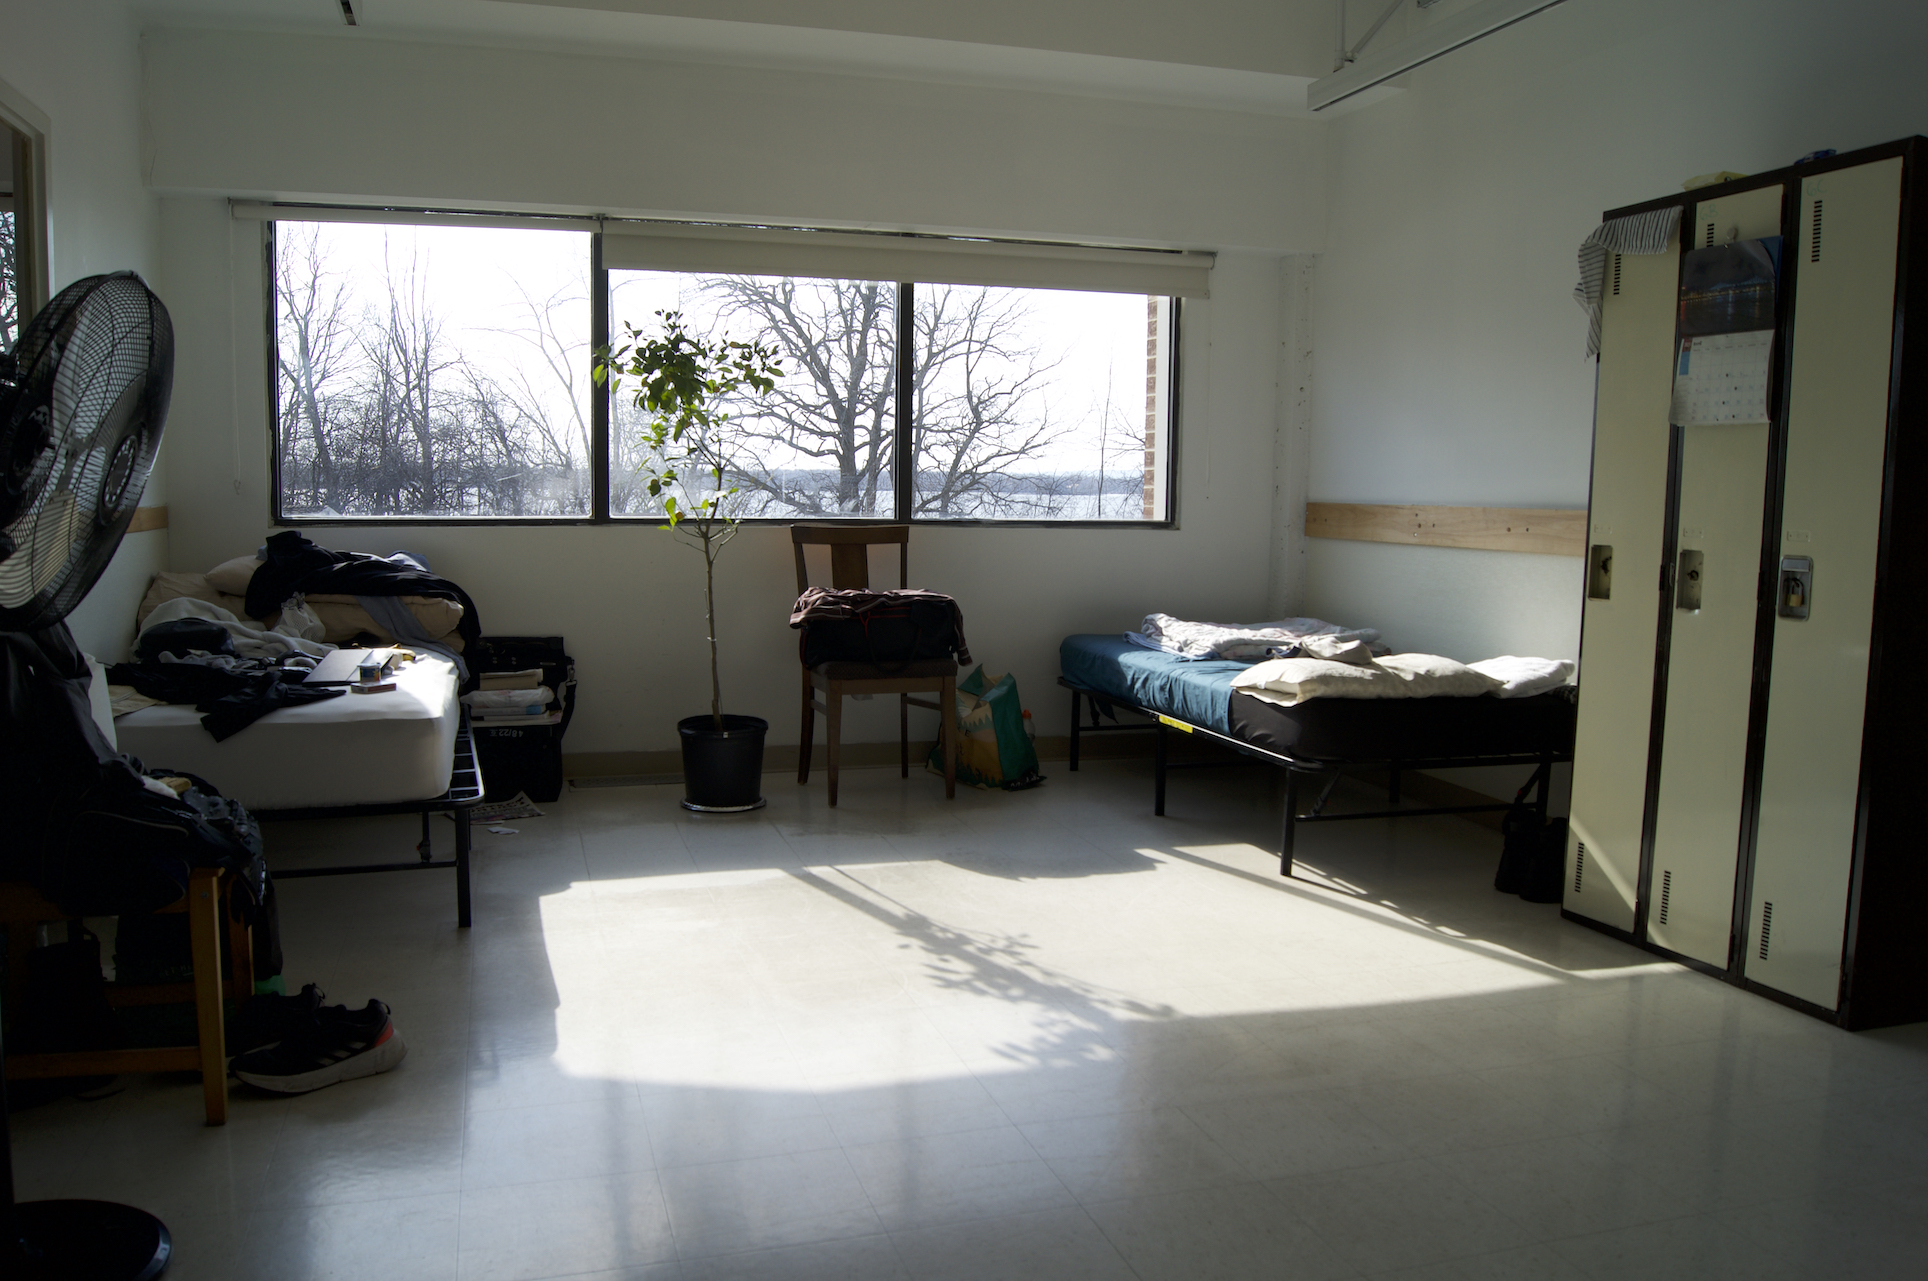 A room with two single beds on opposing walls with the sun shining between the two of them